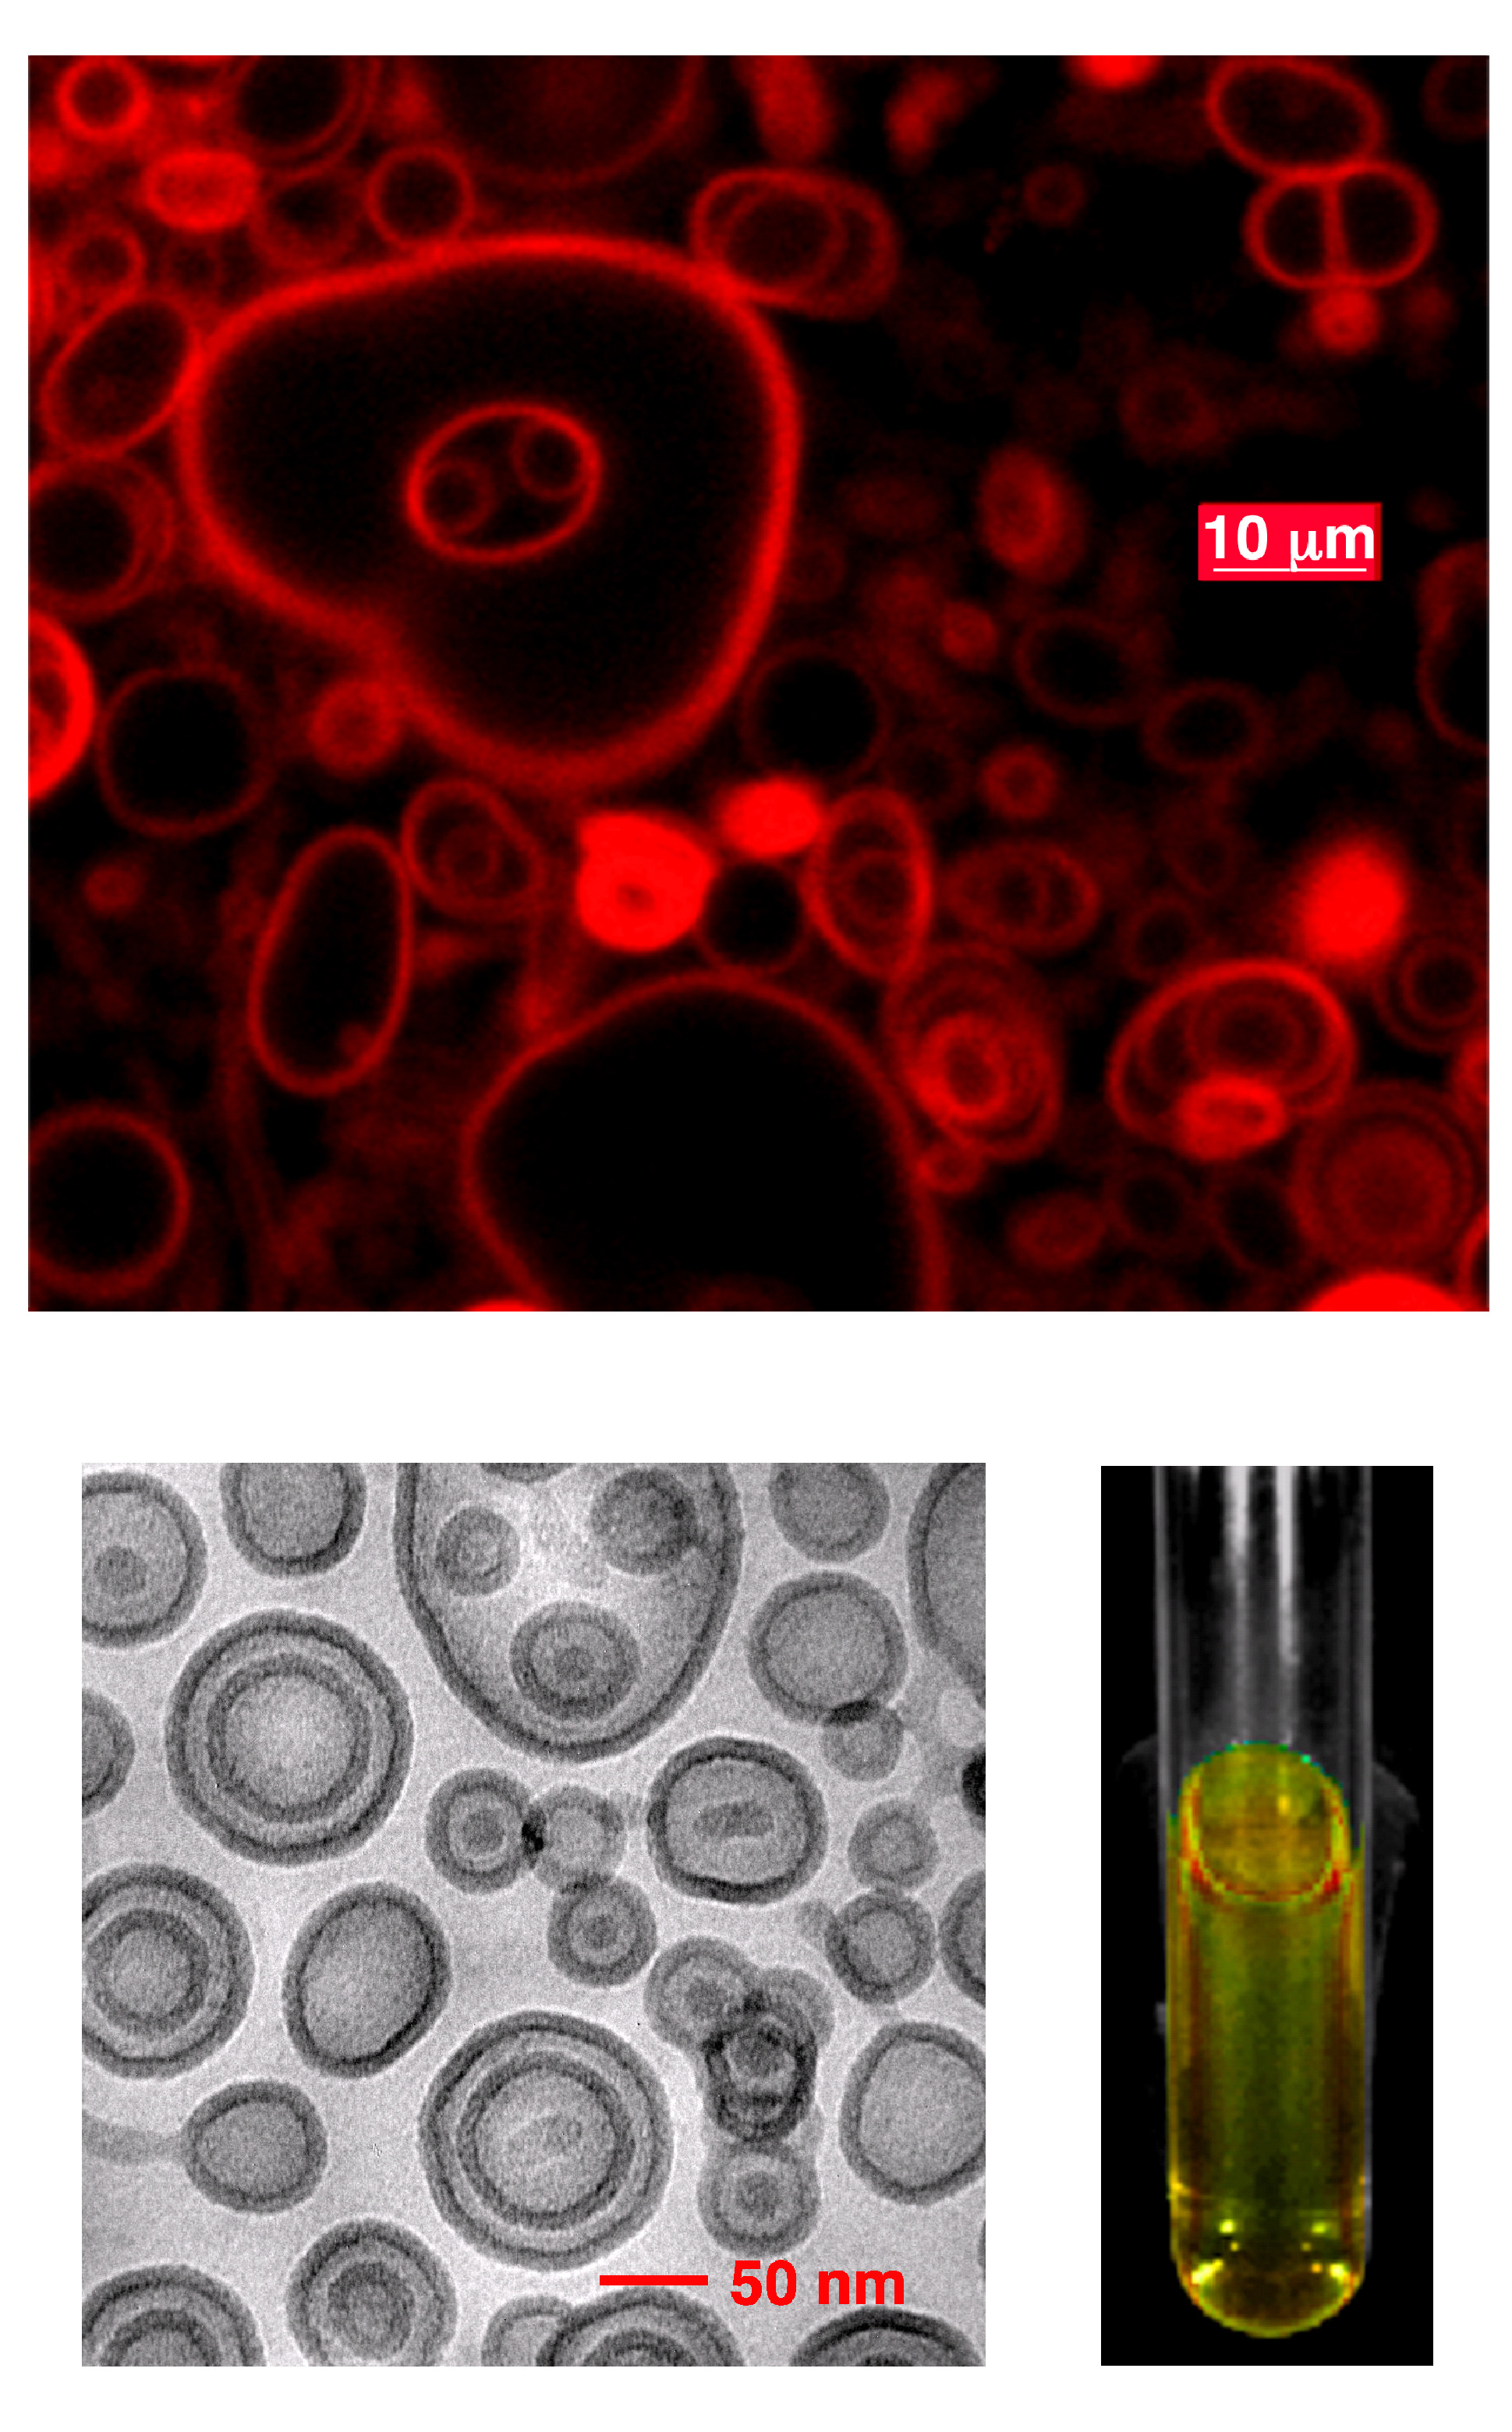 Image of fluorescent near-infrared-emissive polymersomes.